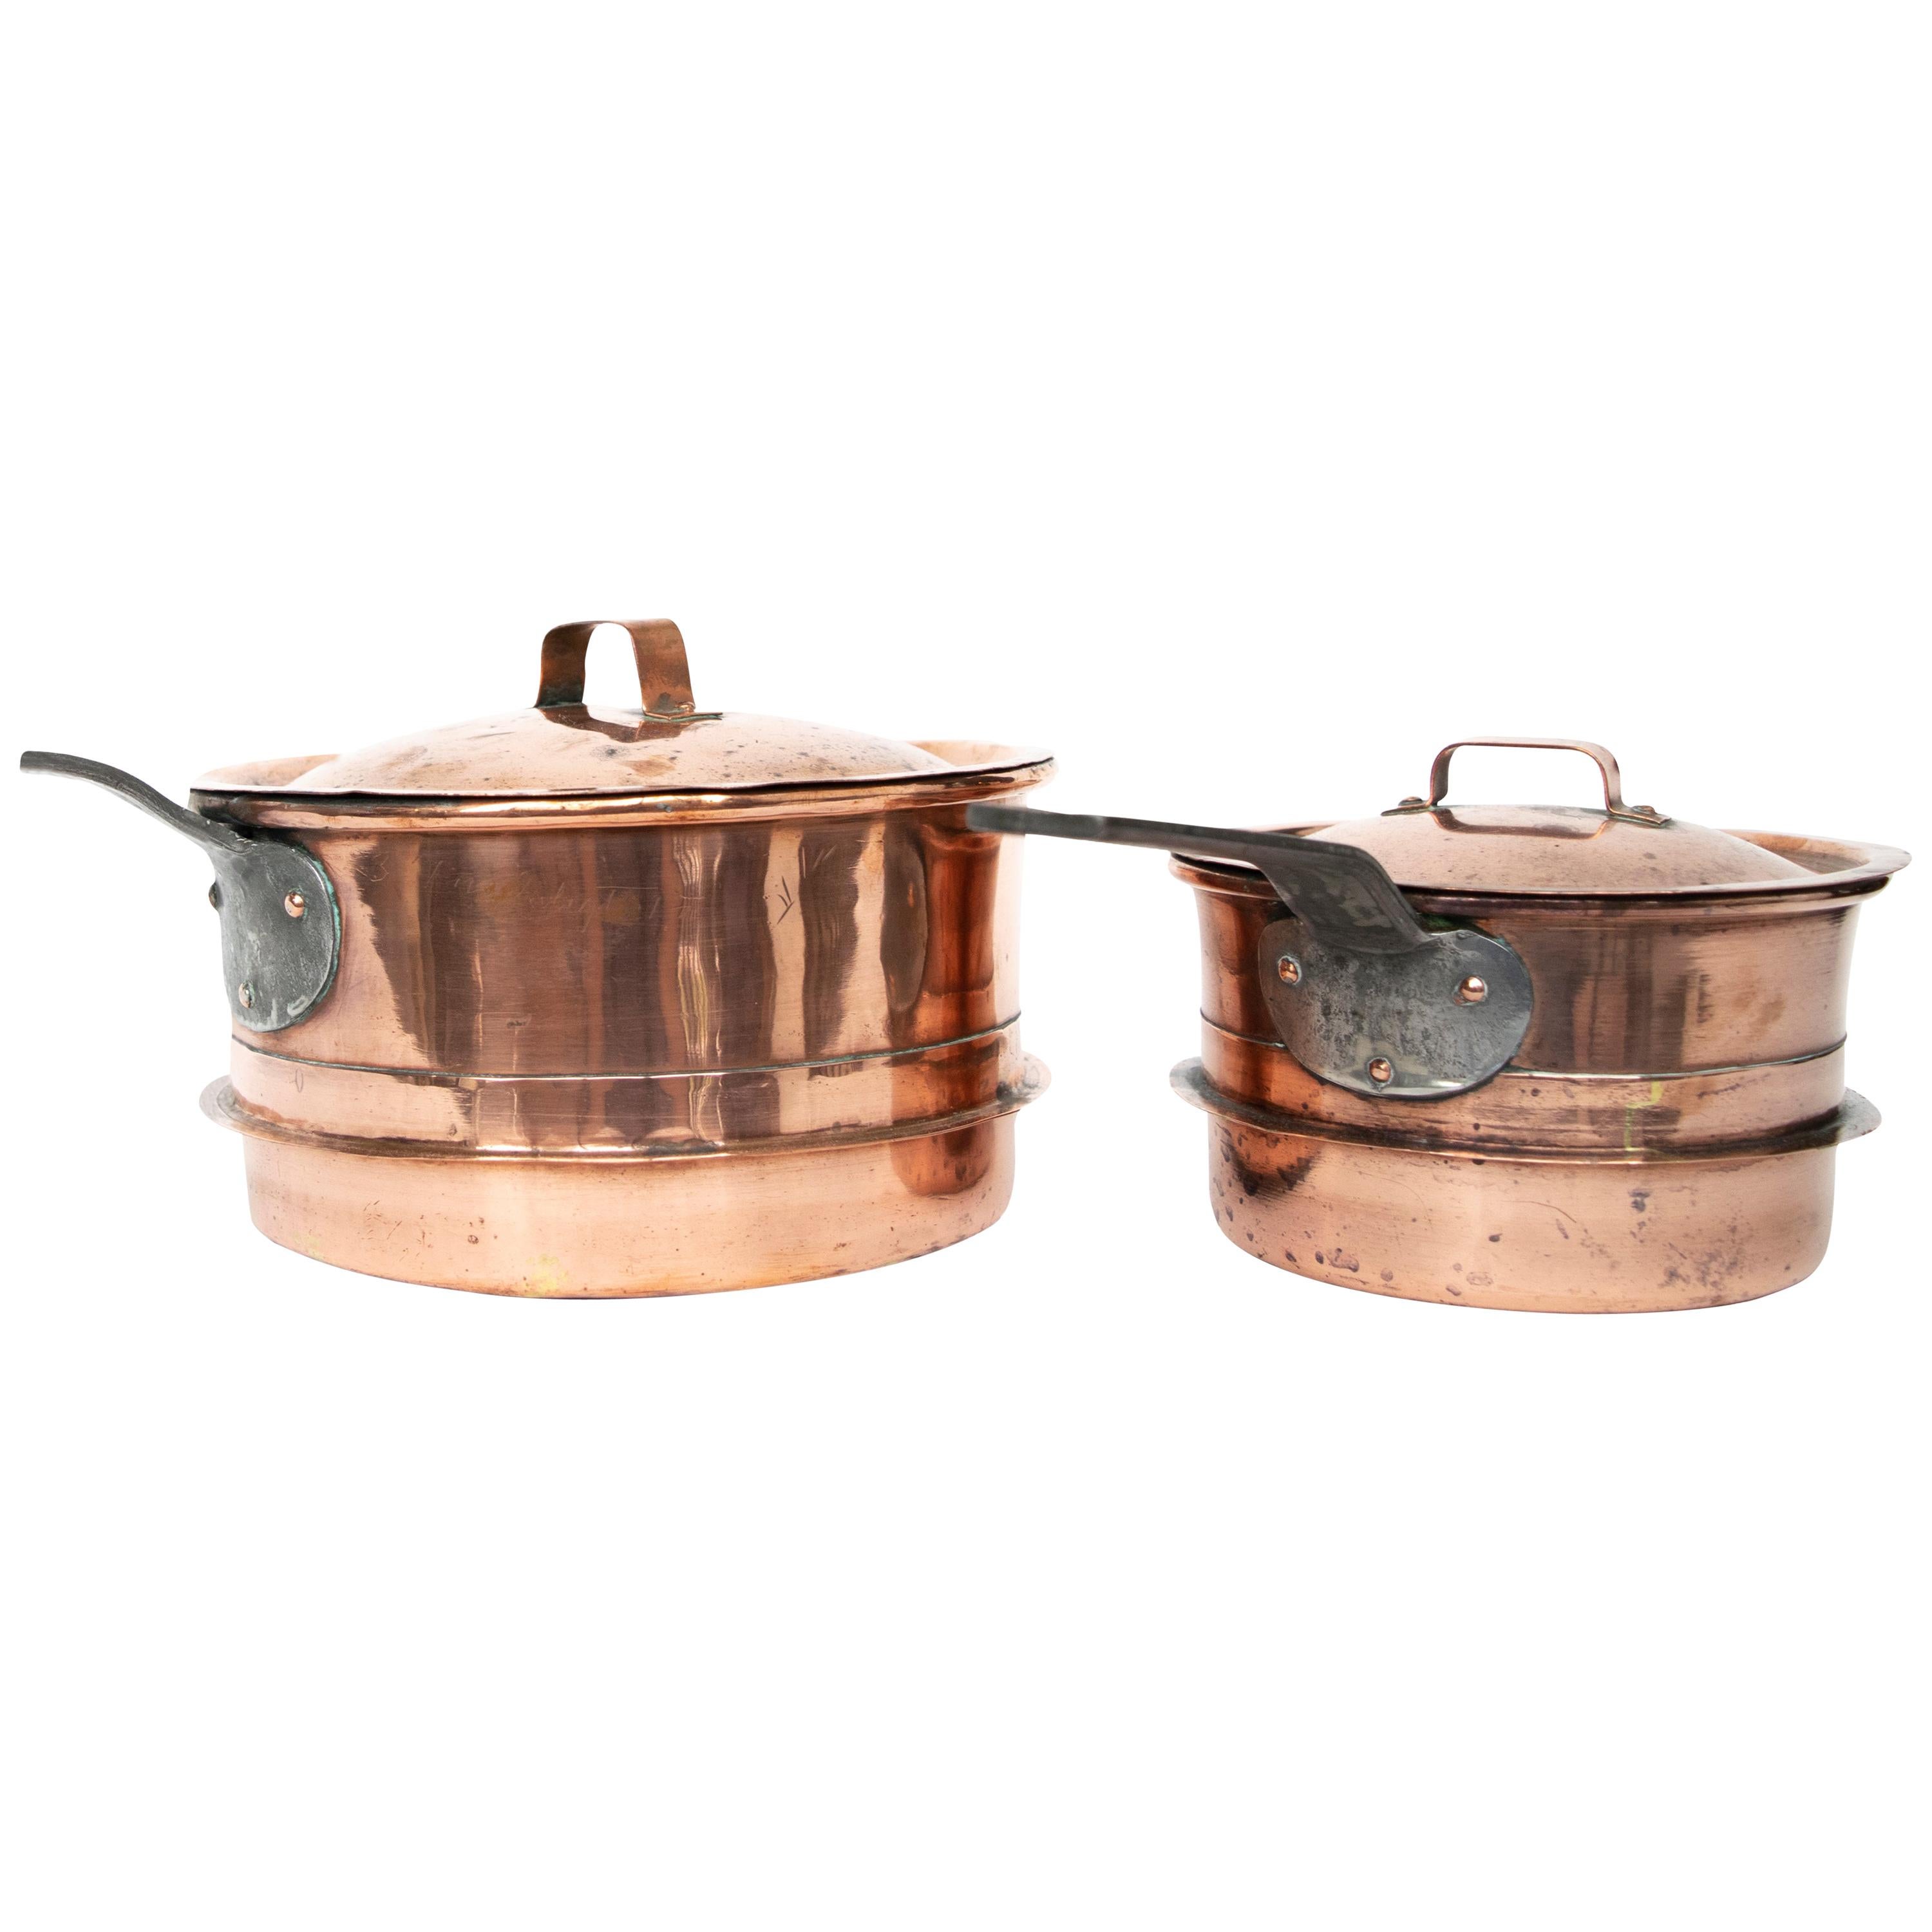 Antique Copper Saucepan with Cast Iron Handle Medium Size from Sweden, Late 1800 For Sale